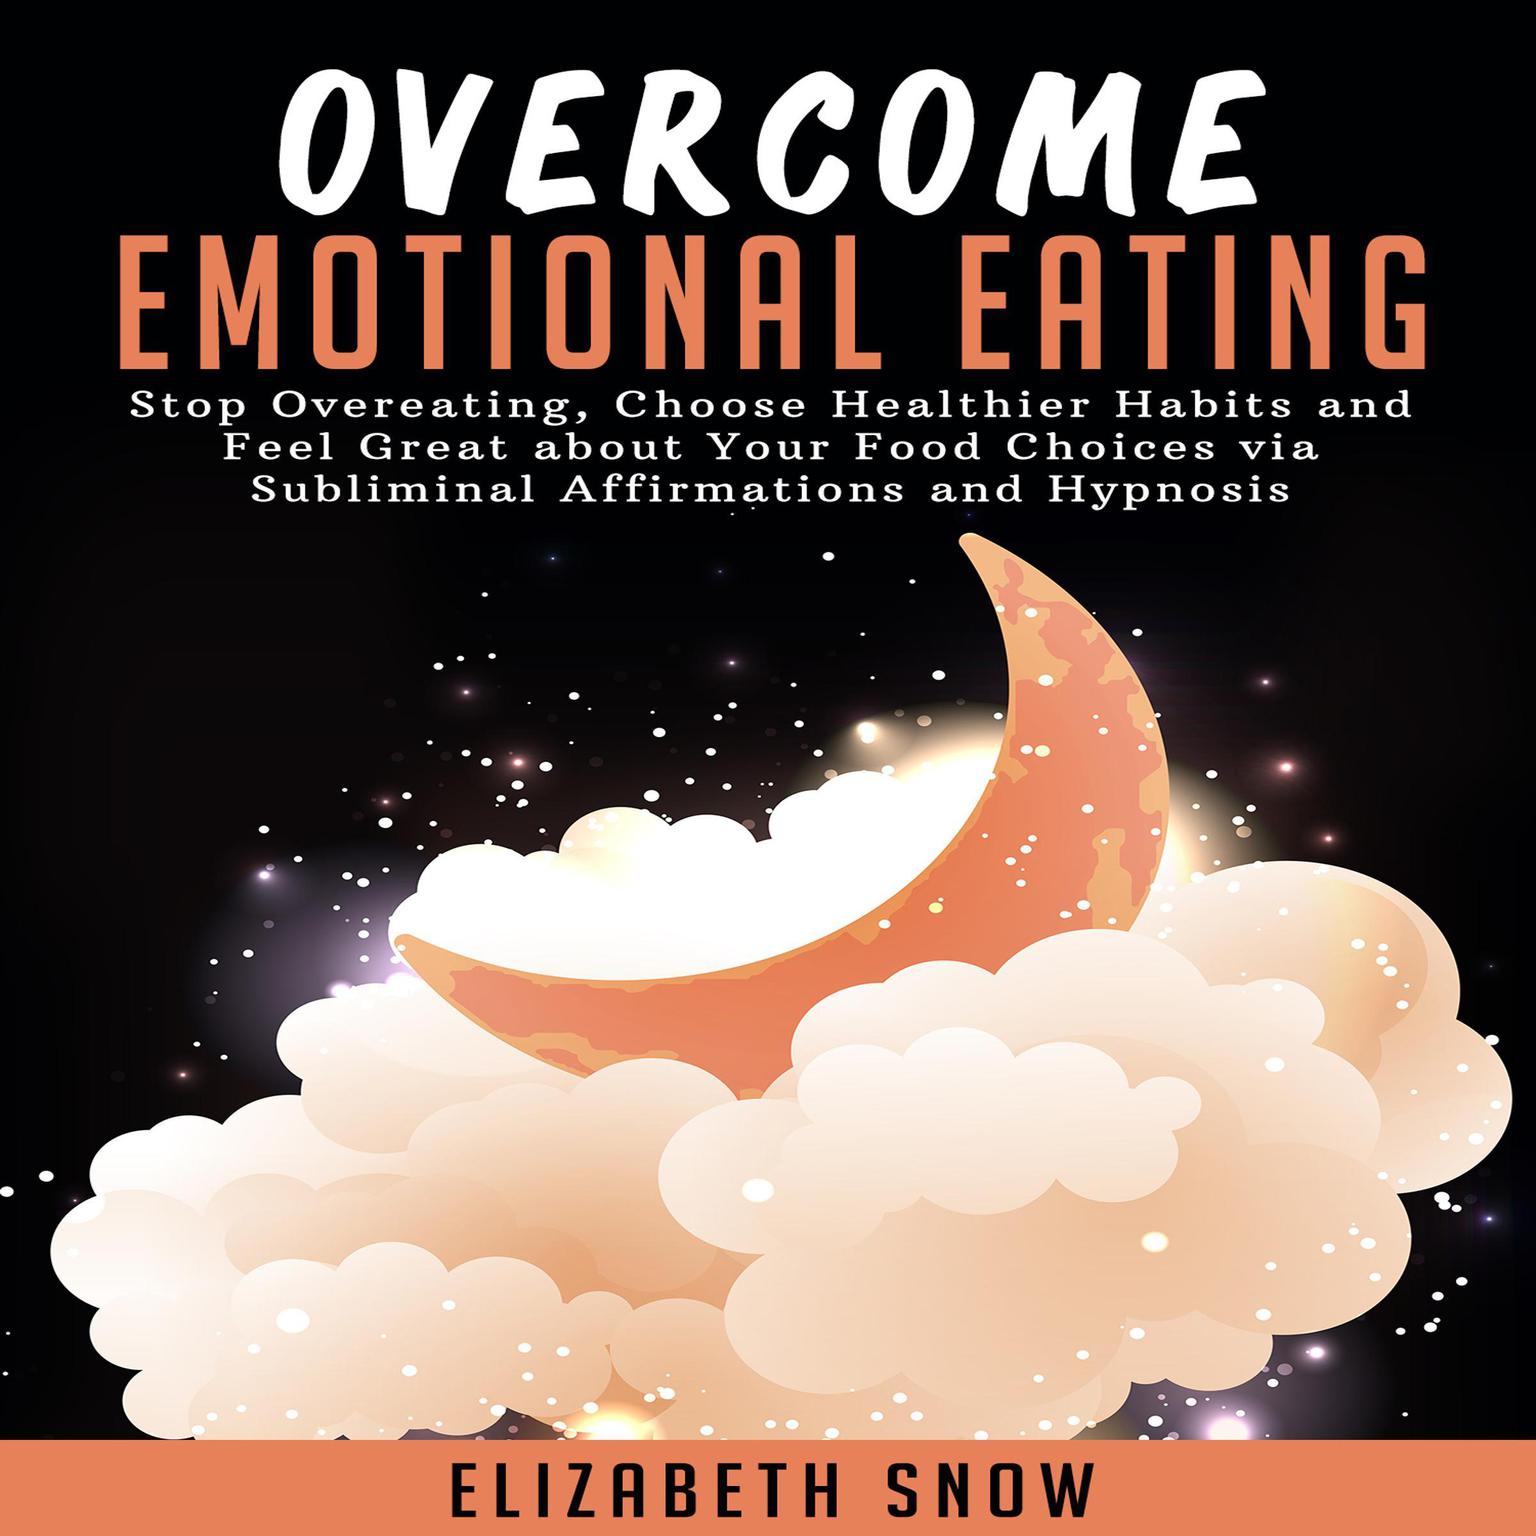 Overcome Emotional Eating: Stop Overeating, Choose Healthier Habits and Feel Great about Your Food Choices with Subliminal Affirmations and Hypnosis Audiobook, by Elizabeth Snow